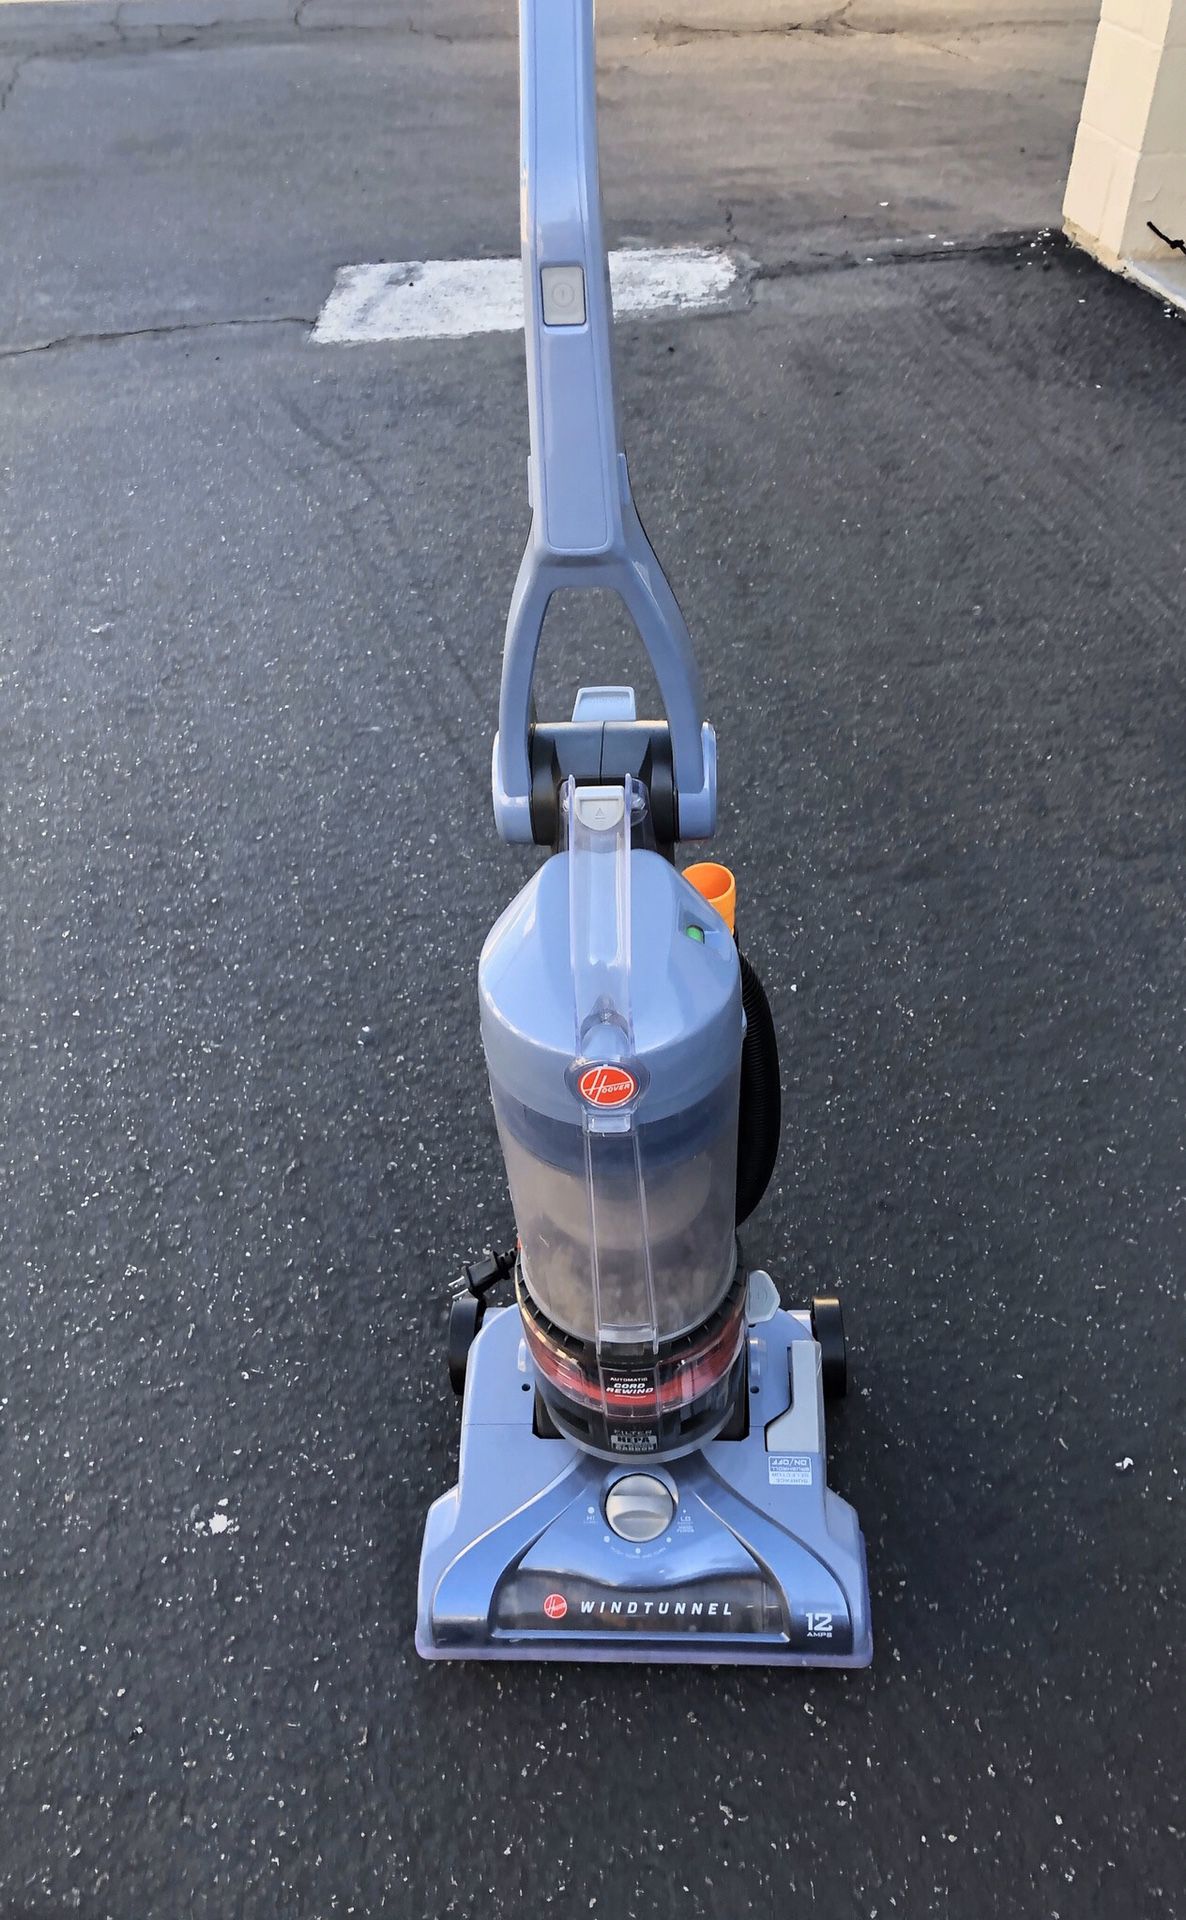 Very nice Hoover vacuum with retractable plug!